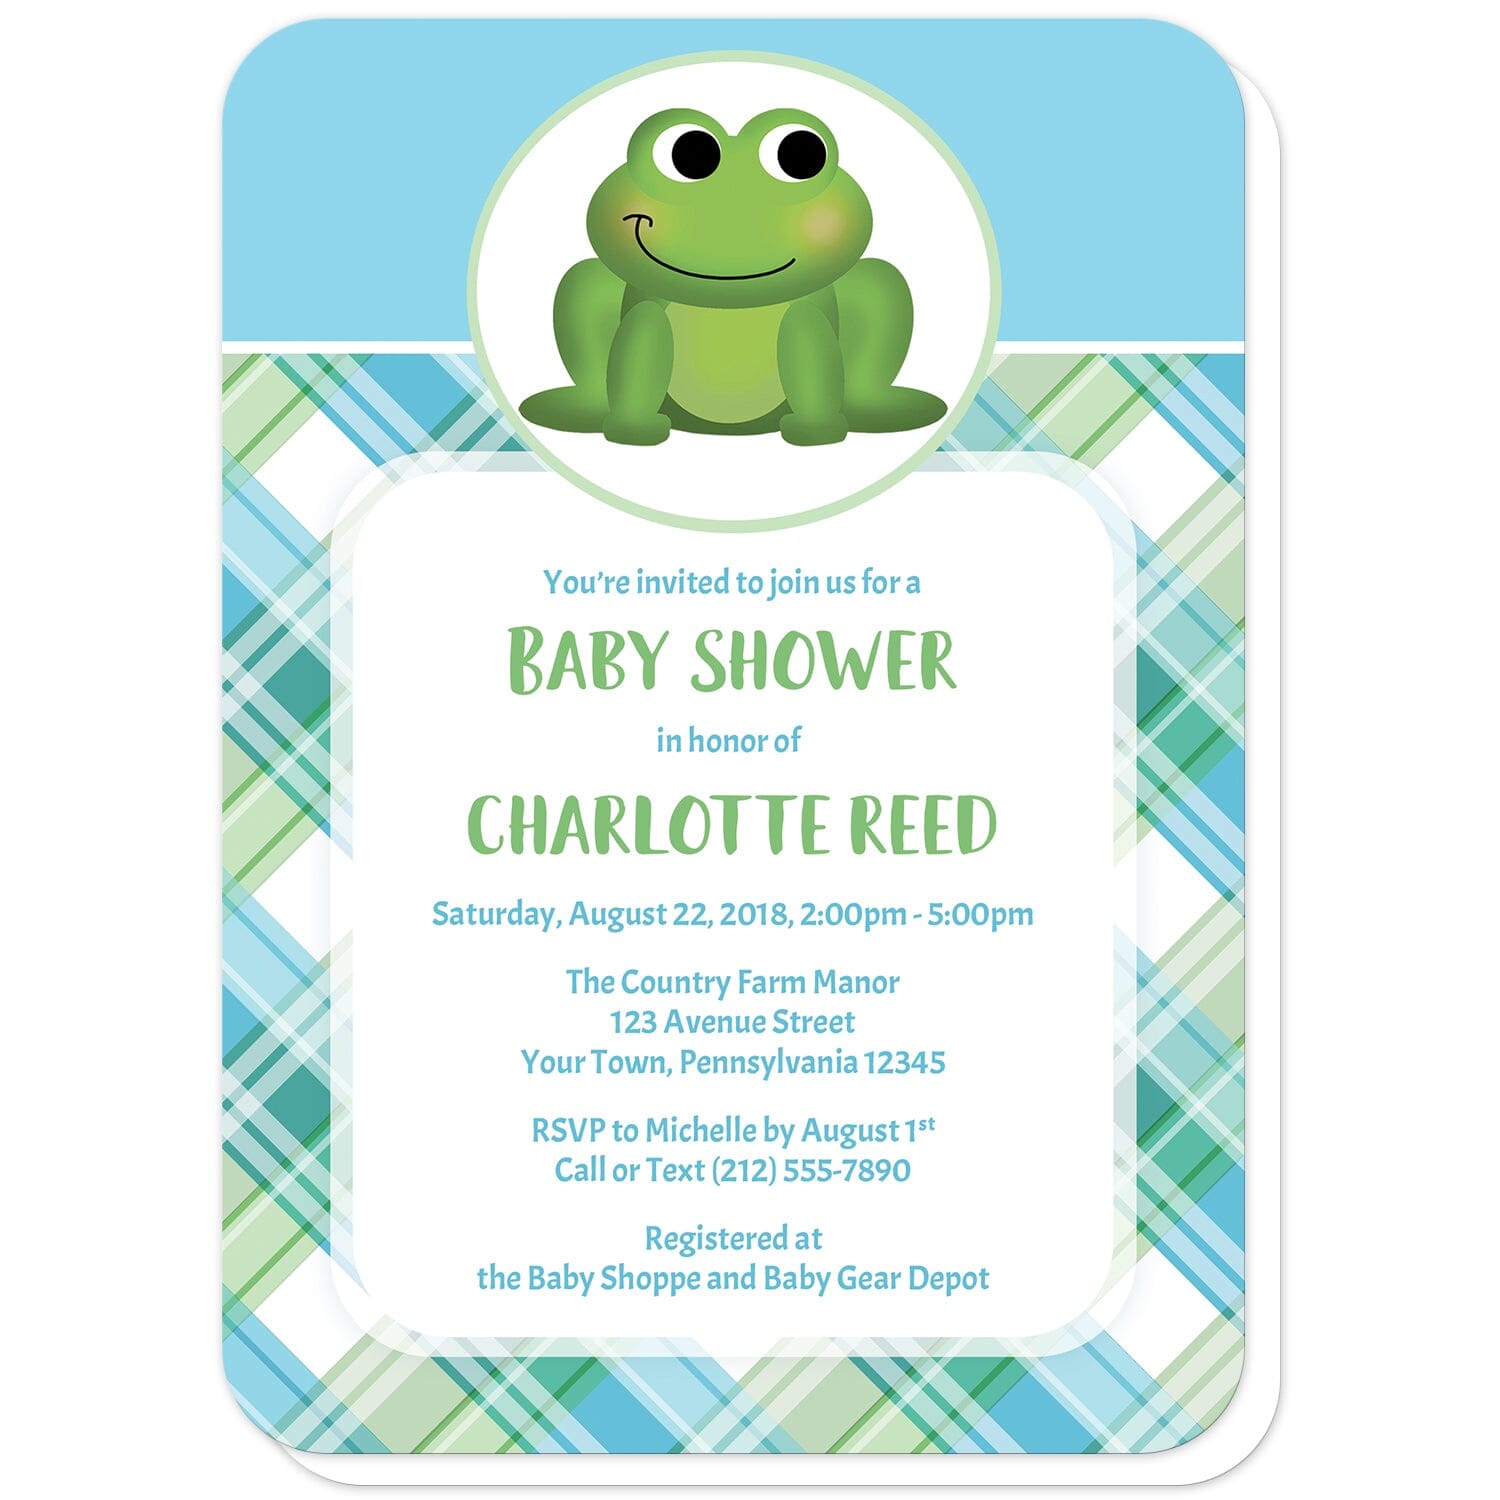 Cute Frog Green and Blue Plaid Baby Shower Invitations (with rounded corners) at Artistically Invited. Cute frog green and blue plaid baby shower invitations that are illustrated with an adorable green frog in a white and green oval over a blue background on the top, and a green and blue plaid pattern background on the bottom. Your personalized baby shower details are custom printed in green and blue over a white rectangular area over the plaid pattern.